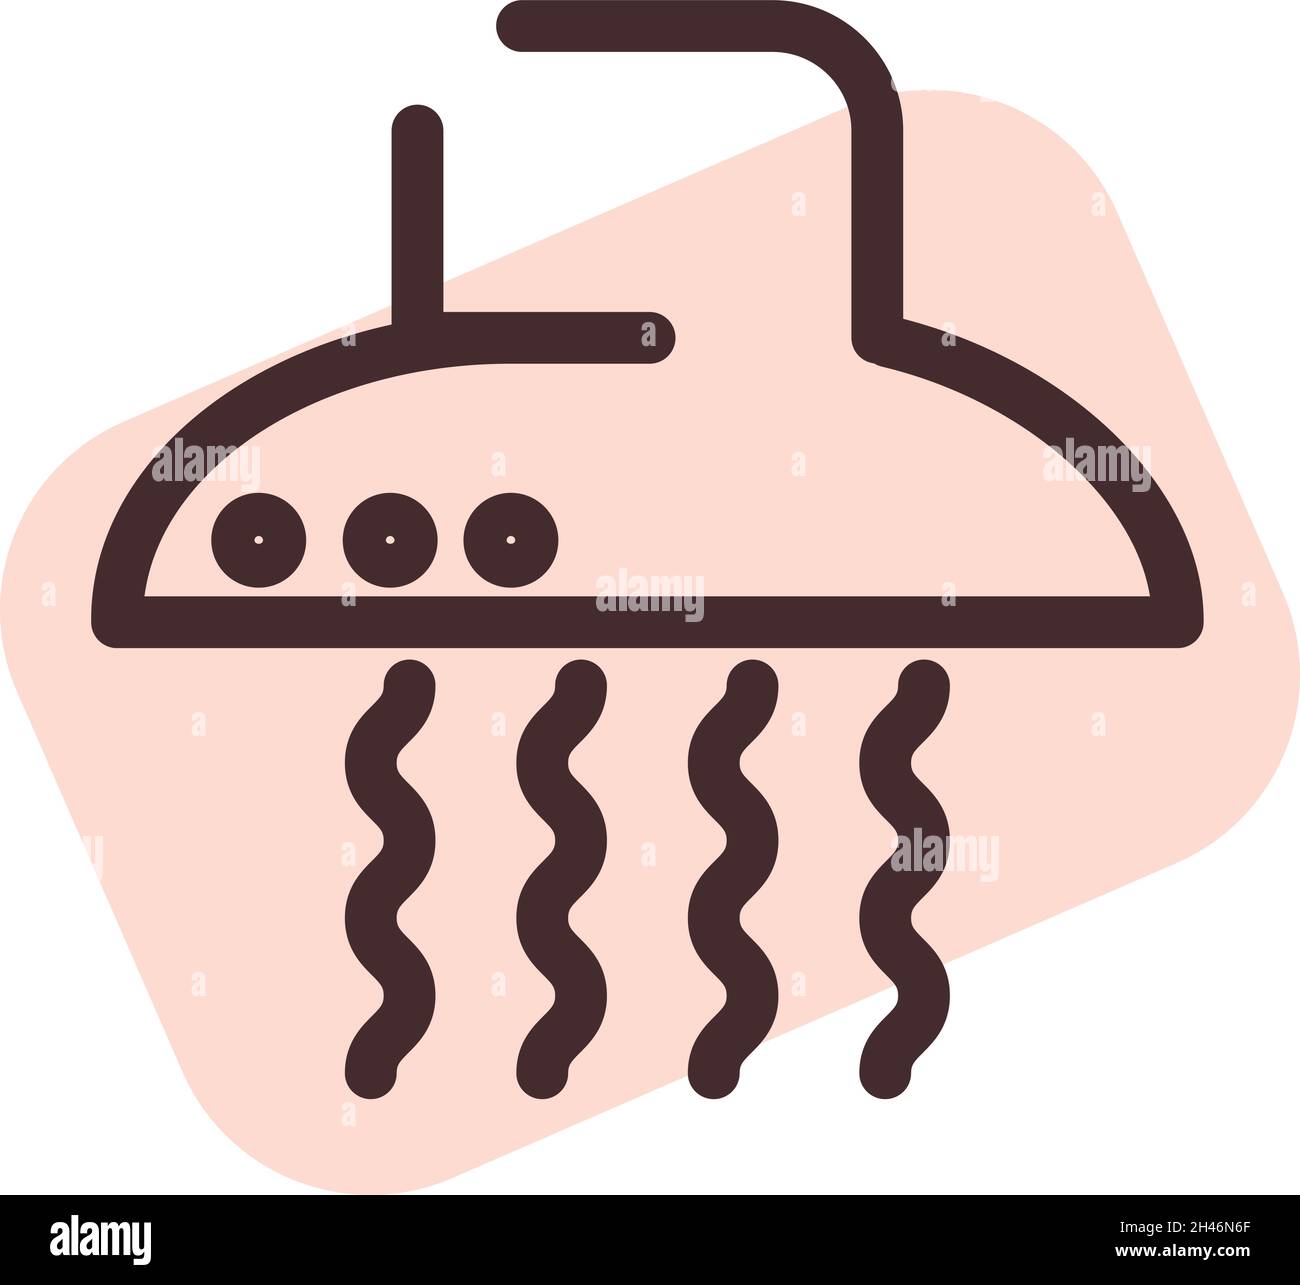 Kitchen steam hood, illustration, vector, on a white background. Stock Vector